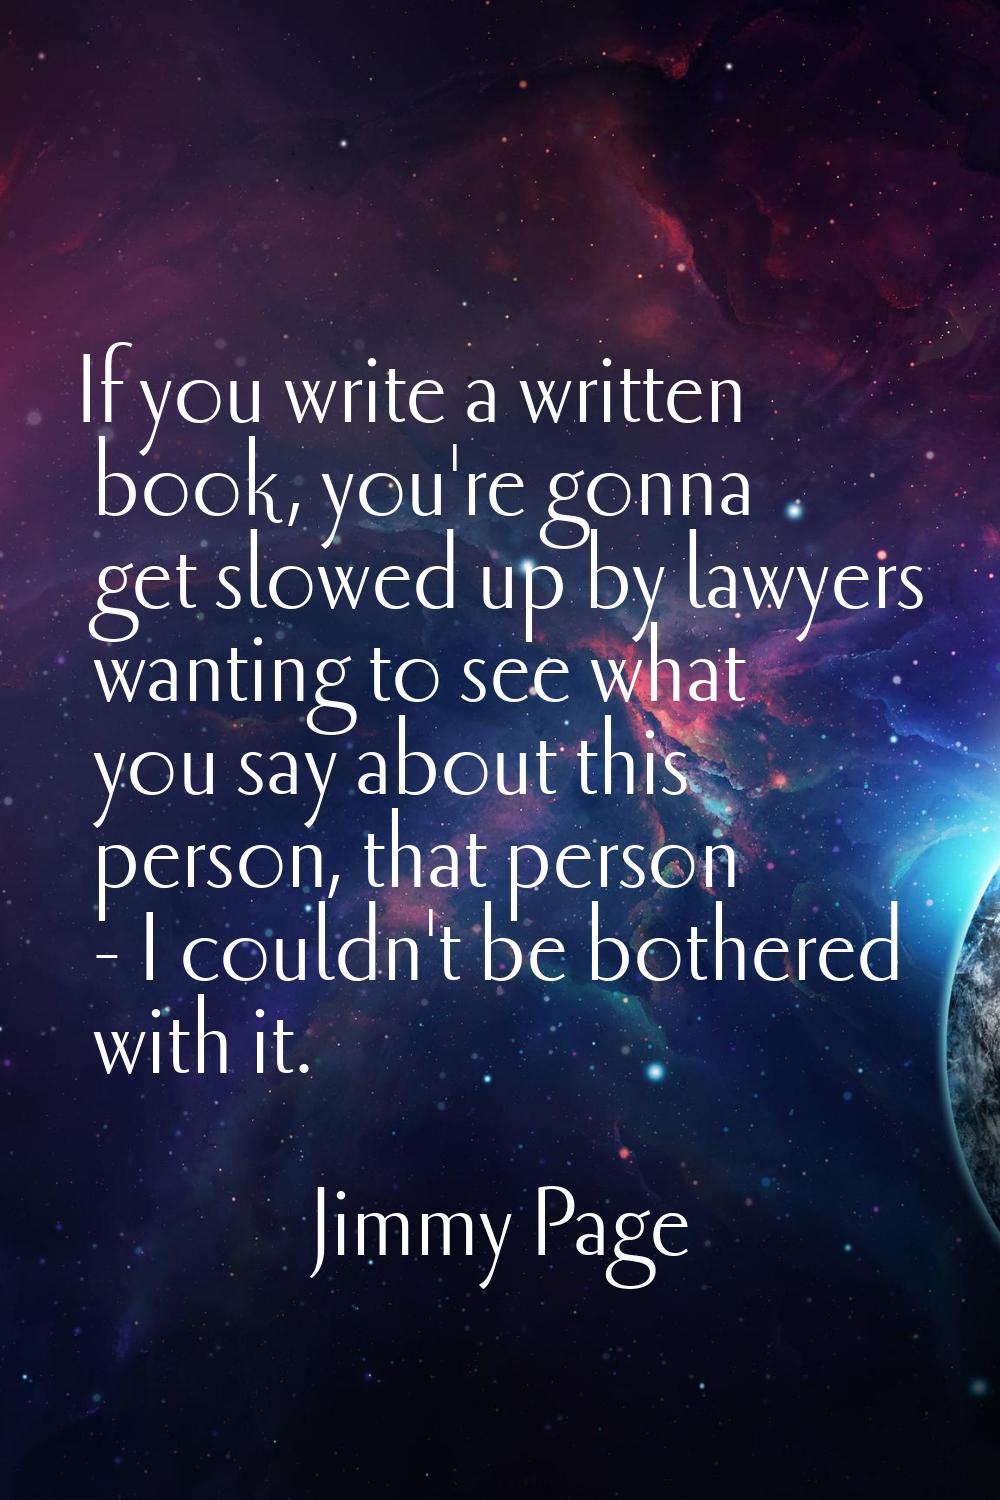 If you write a written book, you're gonna get slowed up by lawyers wanting to see what you say abou